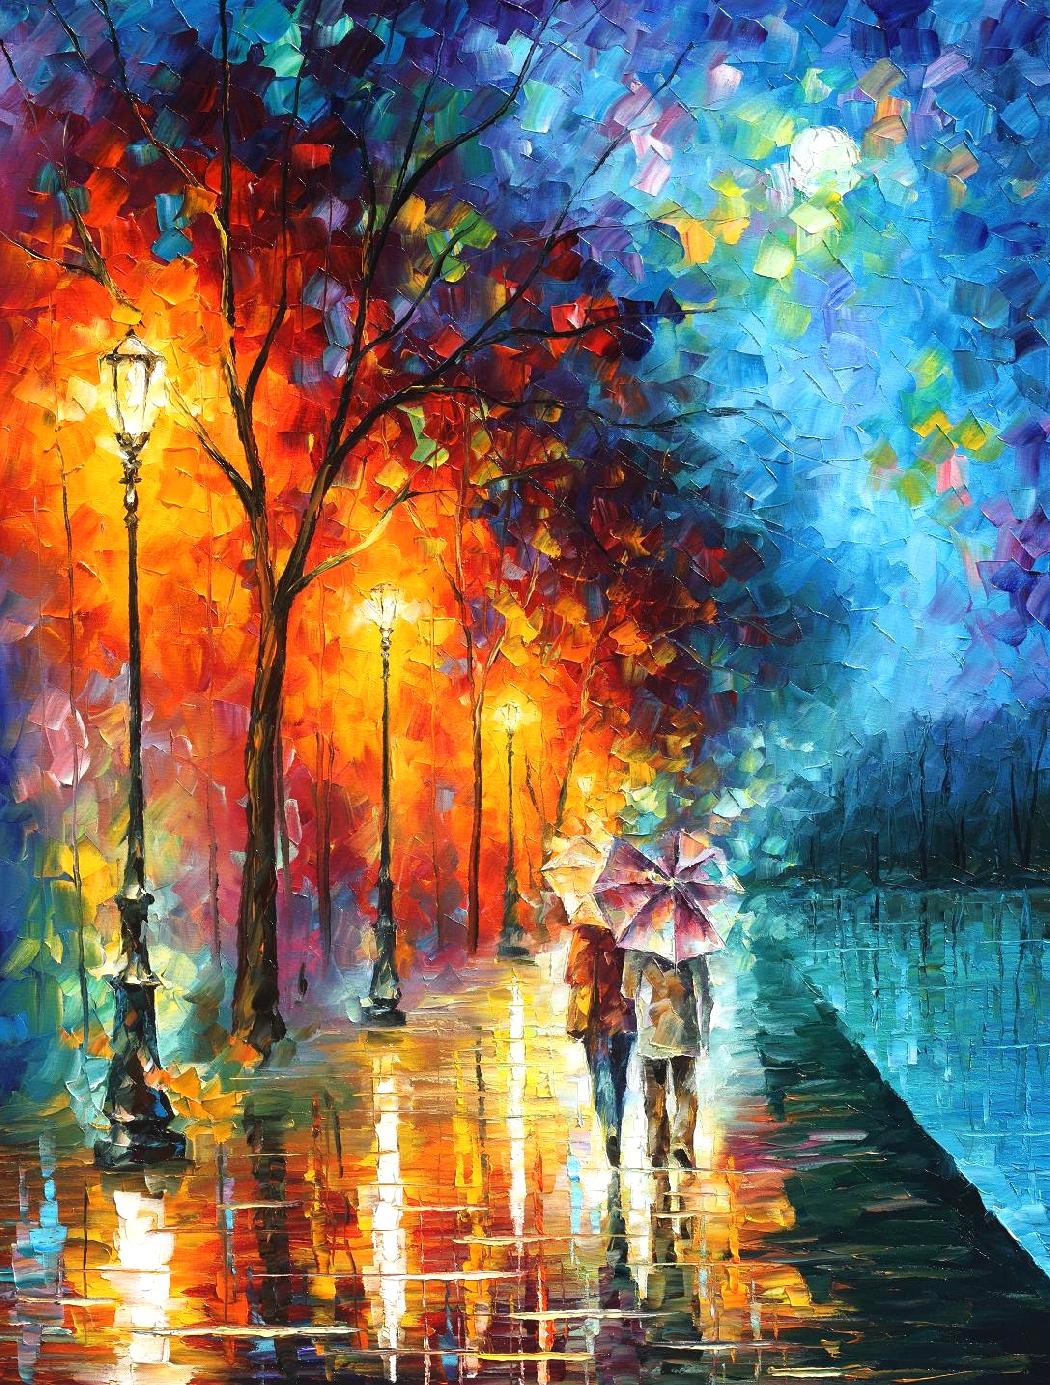 Love Painting Wallpaper Hd - Love By The Lake - Palette Knife Oil Painting On Canvas , HD Wallpaper & Backgrounds